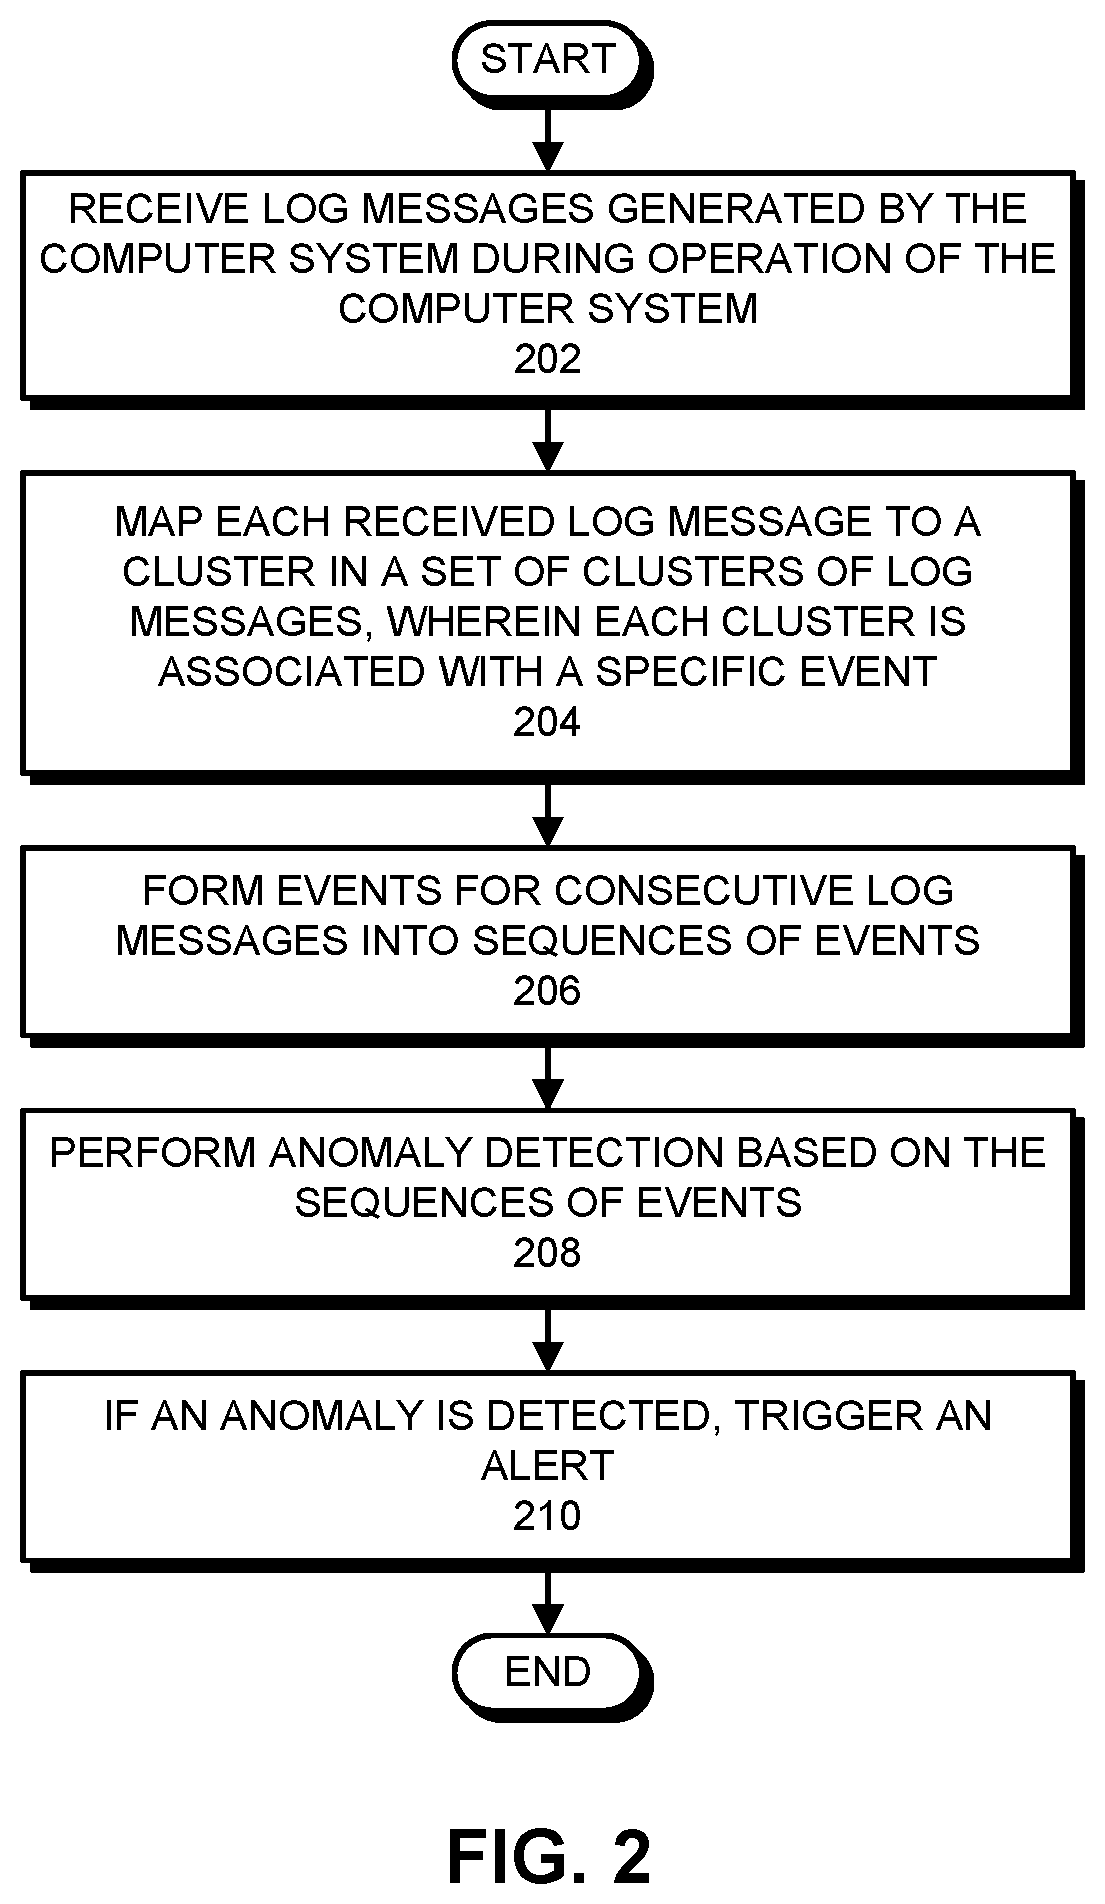 Anomaly detection based on events composed through unsupervised clustering of log messages